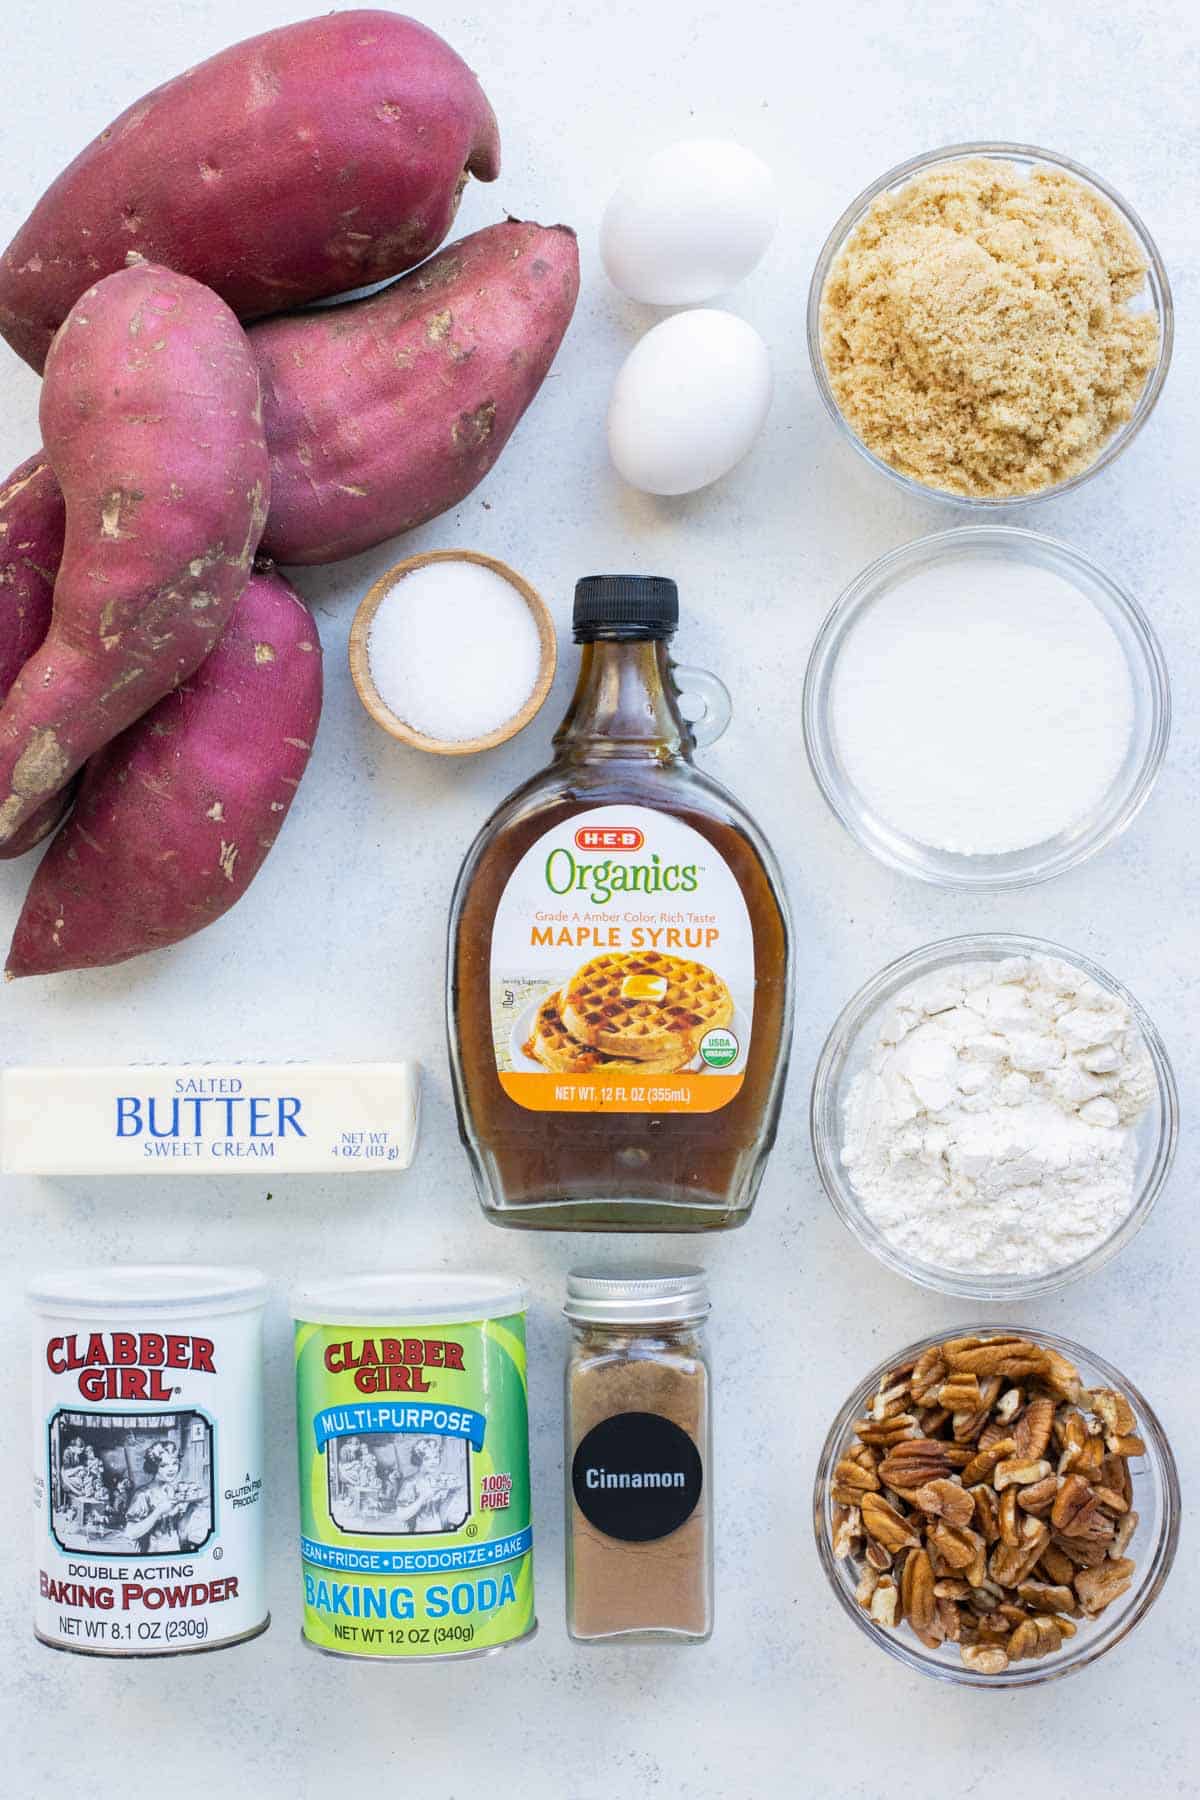 Sweet potatoes, butter, maple syrup, cinnamon, and pecans are the ingredients.